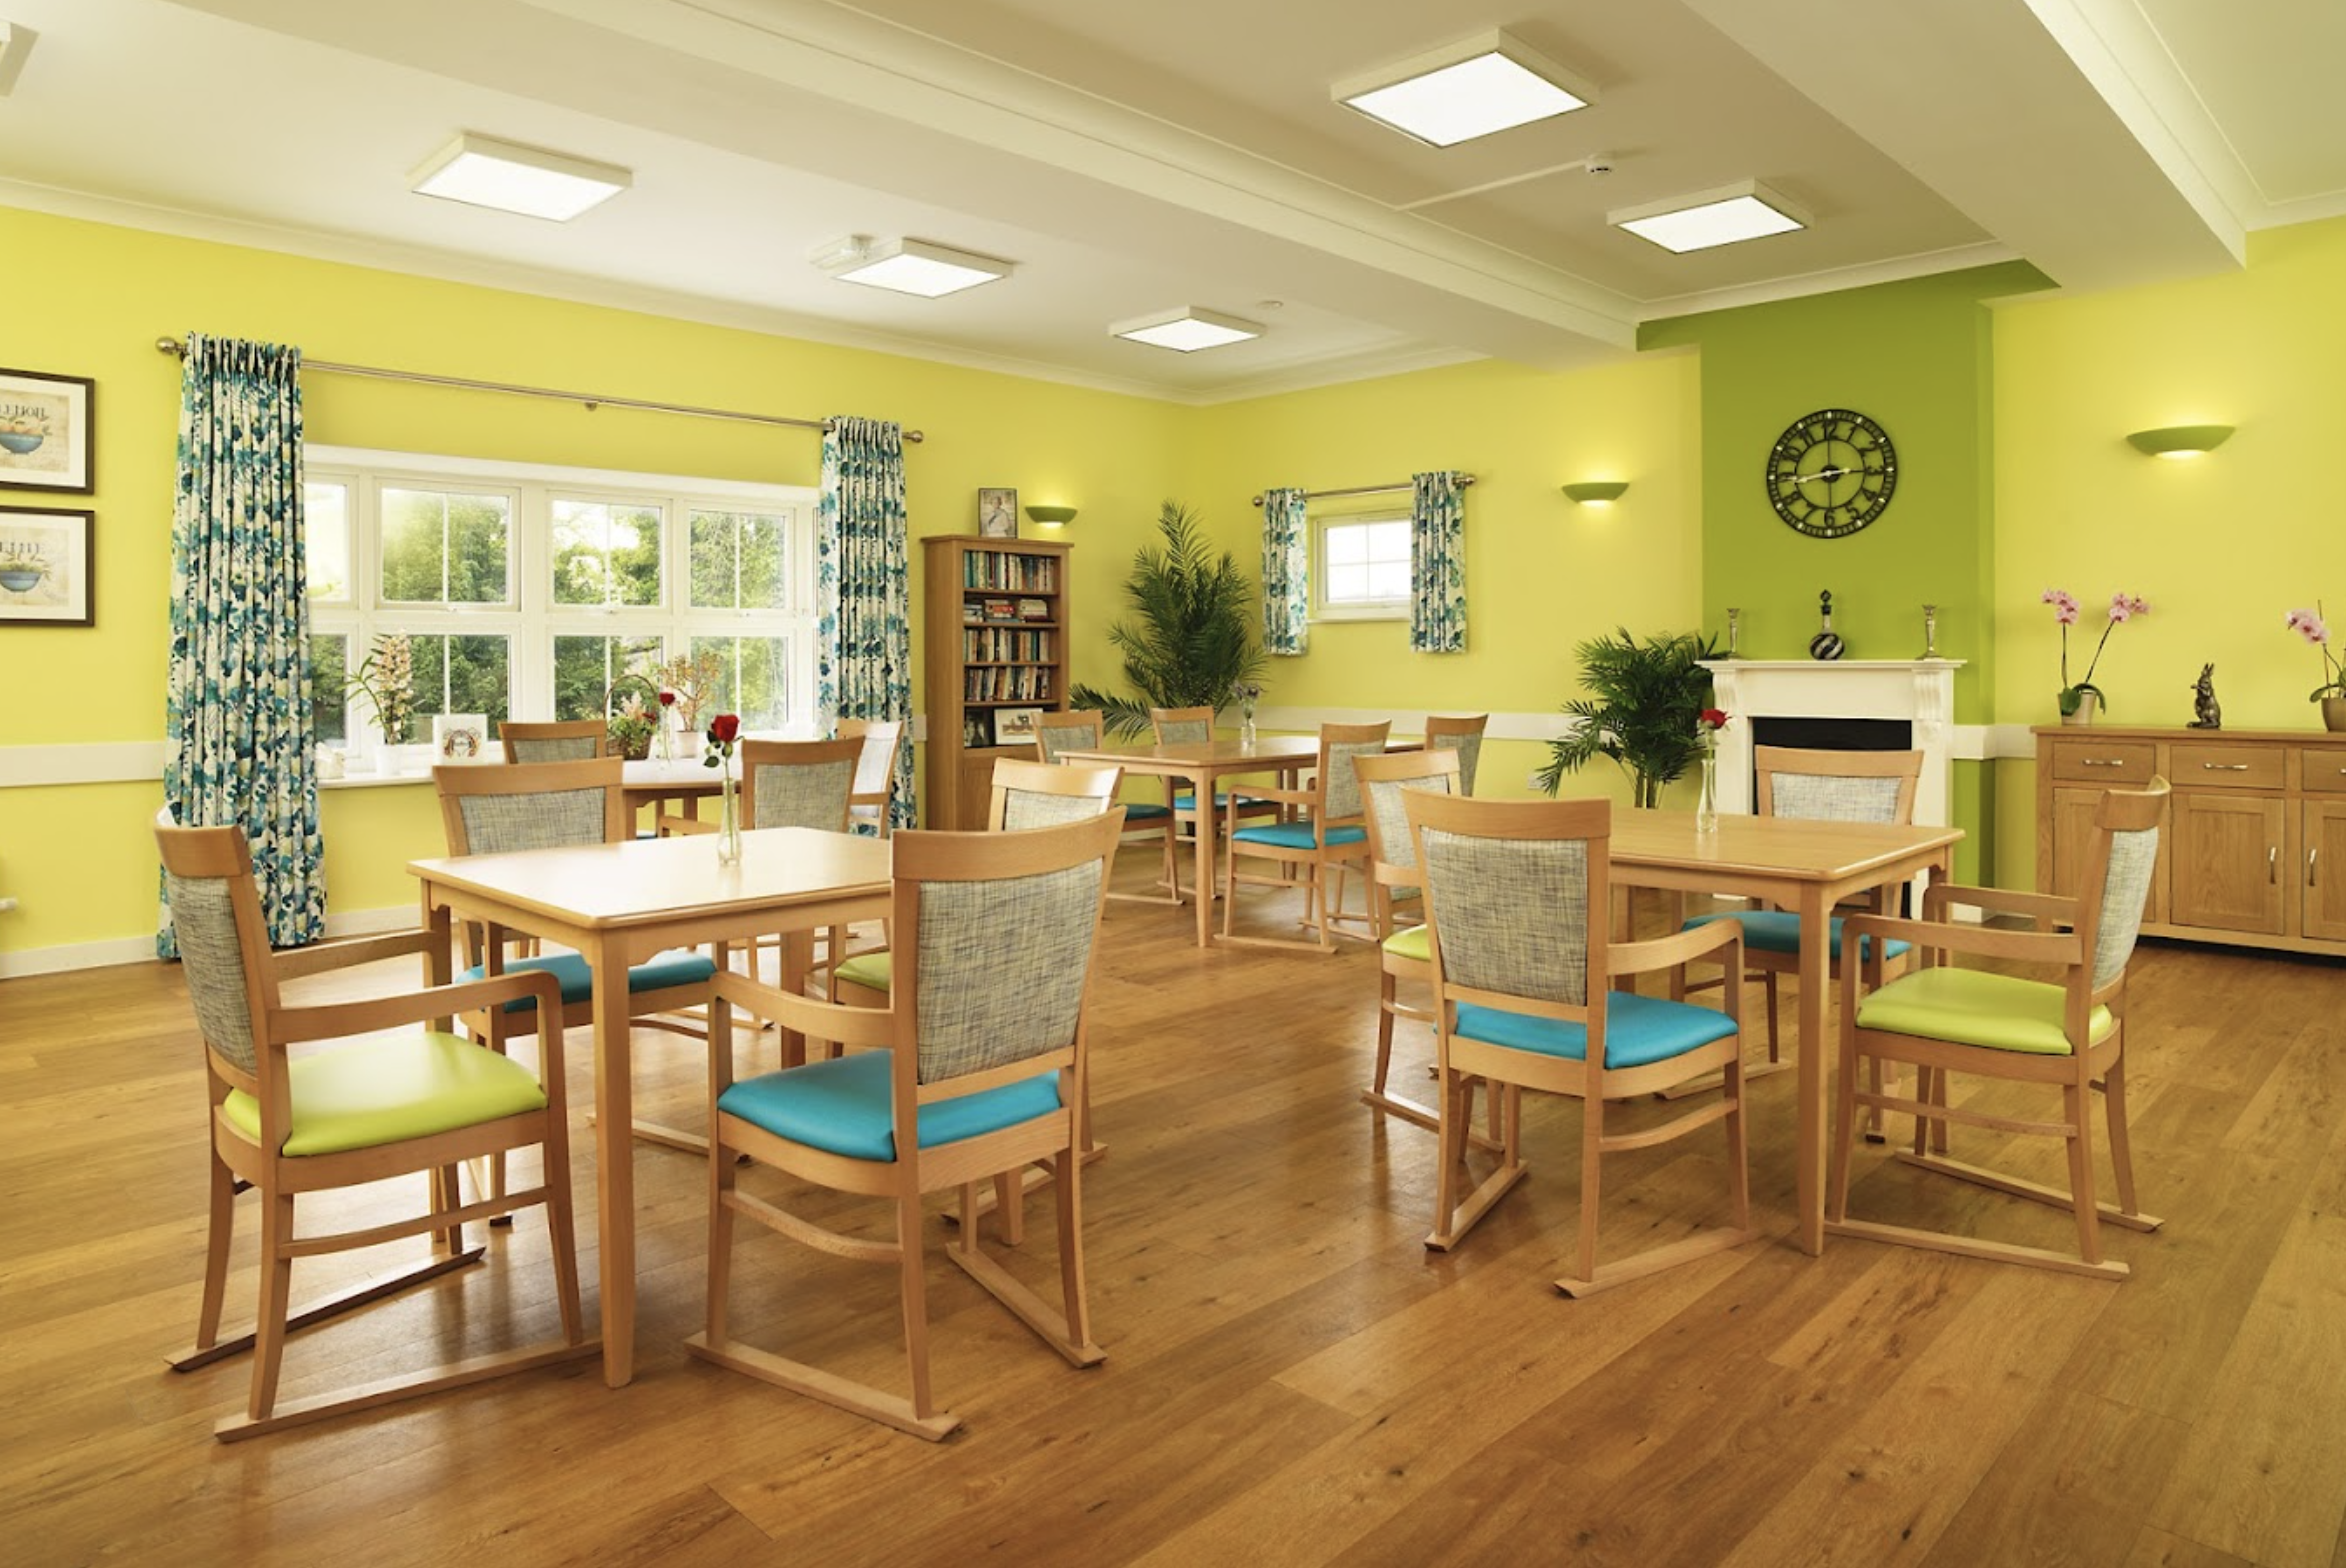 Dining area of Highfield House care home in Ryde, Isle of Wight